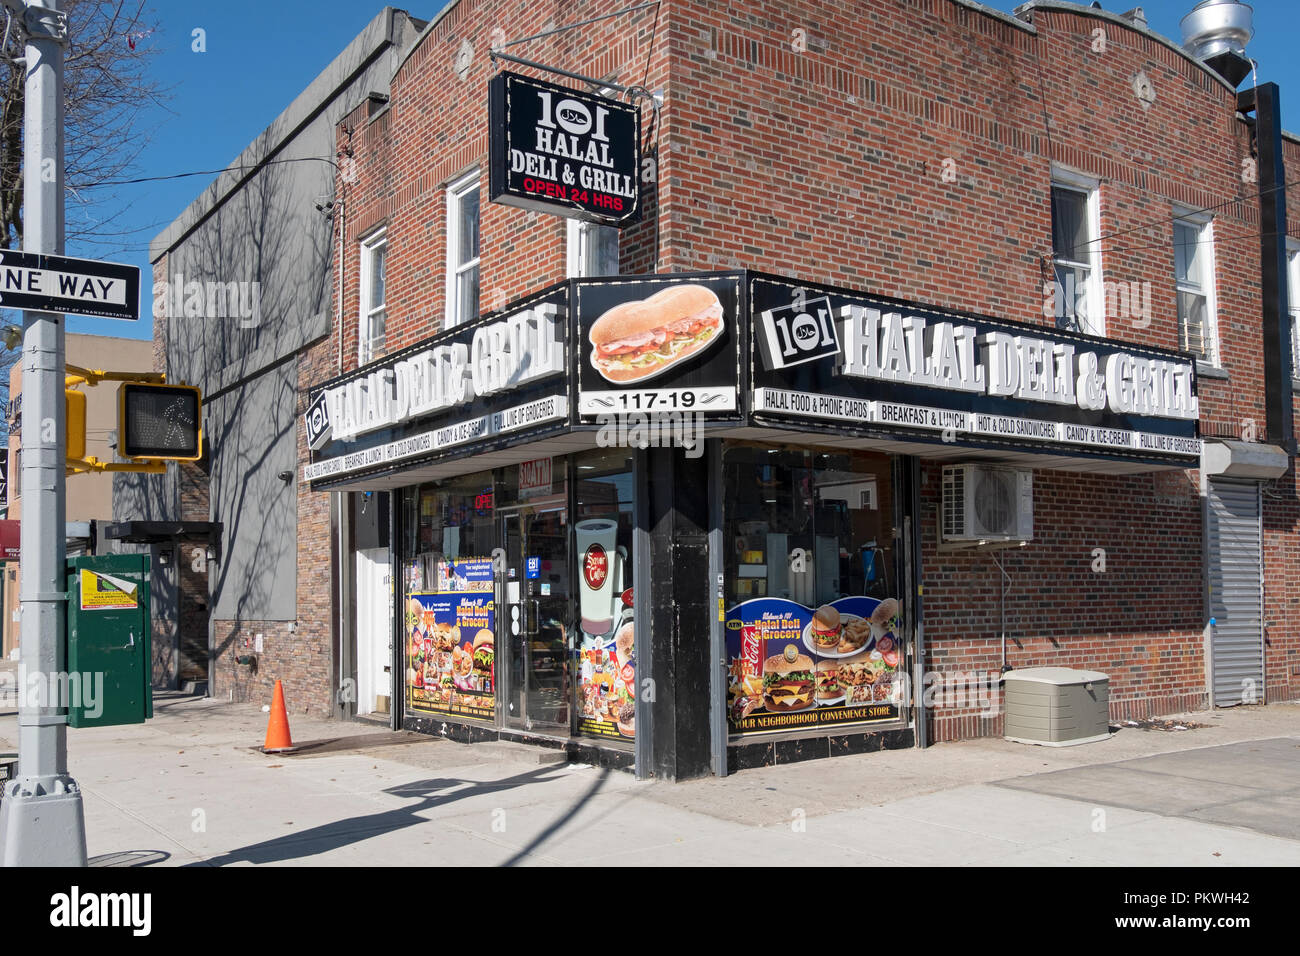 Exterior of 101 HALAL DELI & GRILL on 101st avenue in Richmond Hill, Queens, New York. Stock Photo